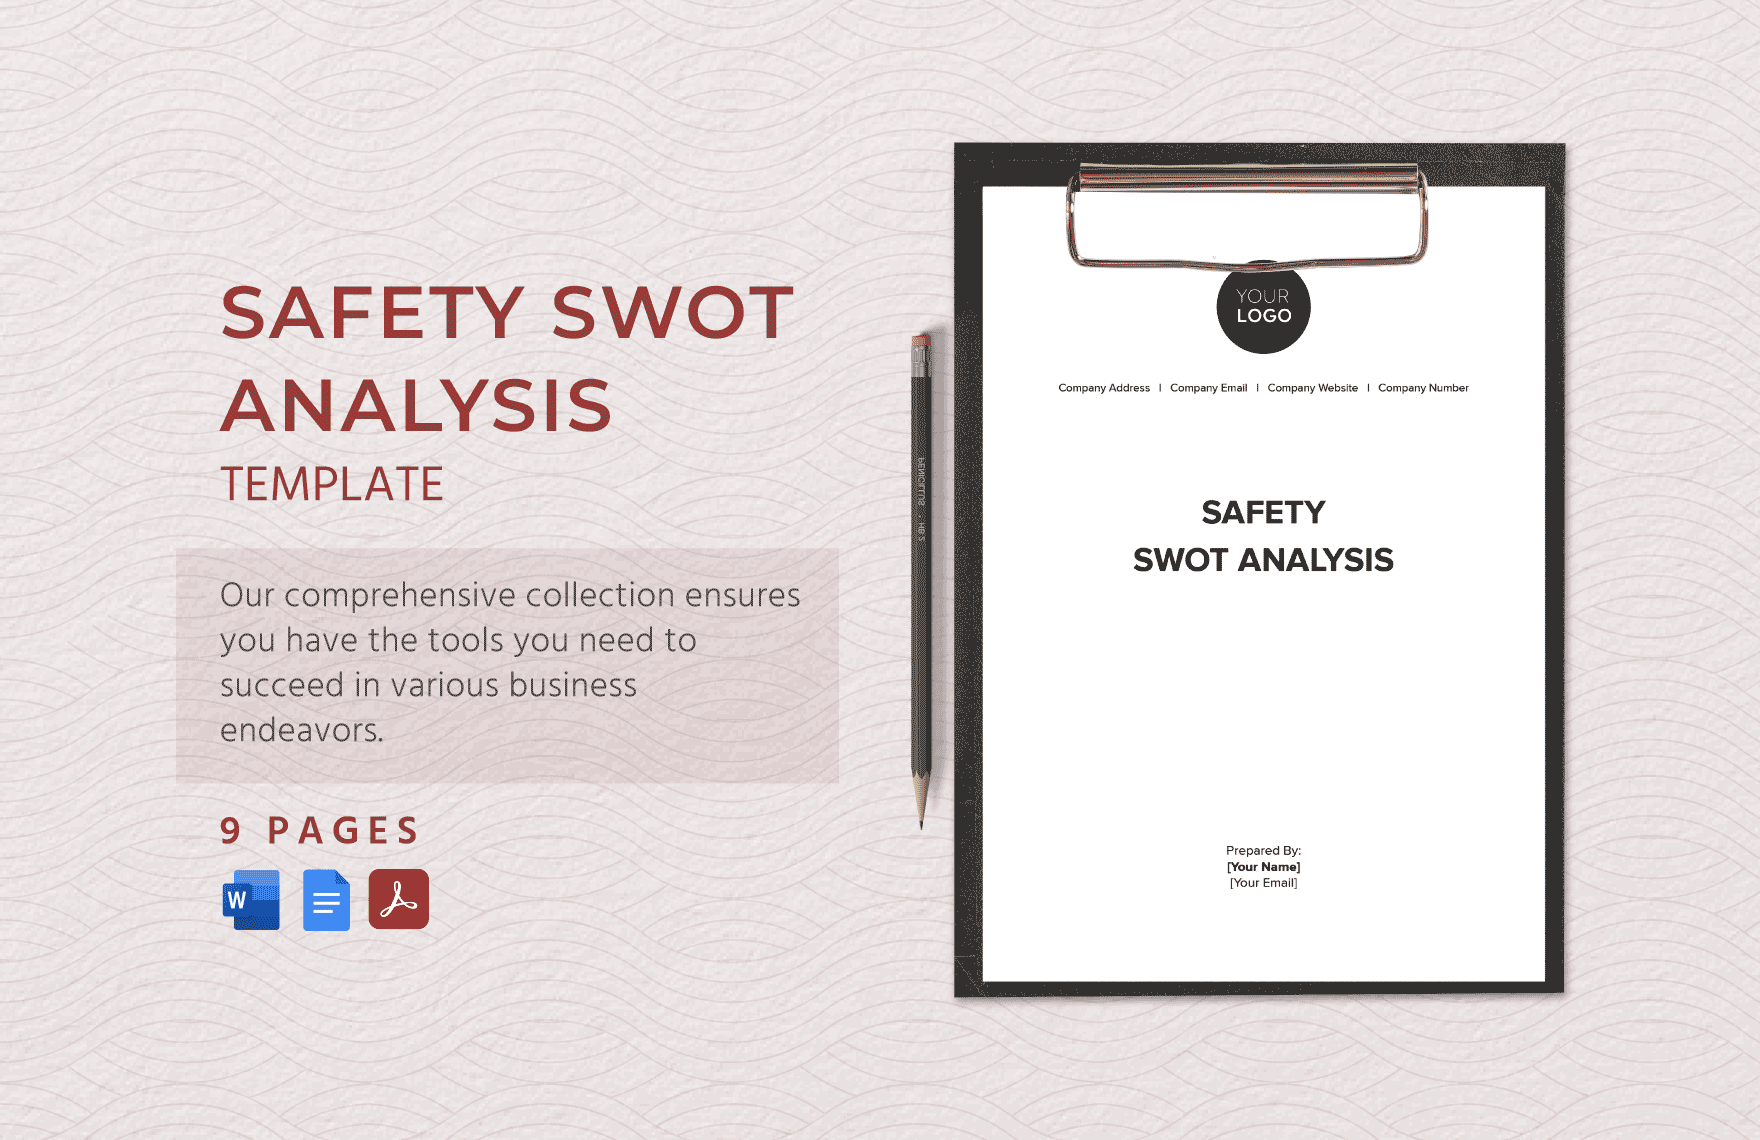 Safety SWOT Analysis Template